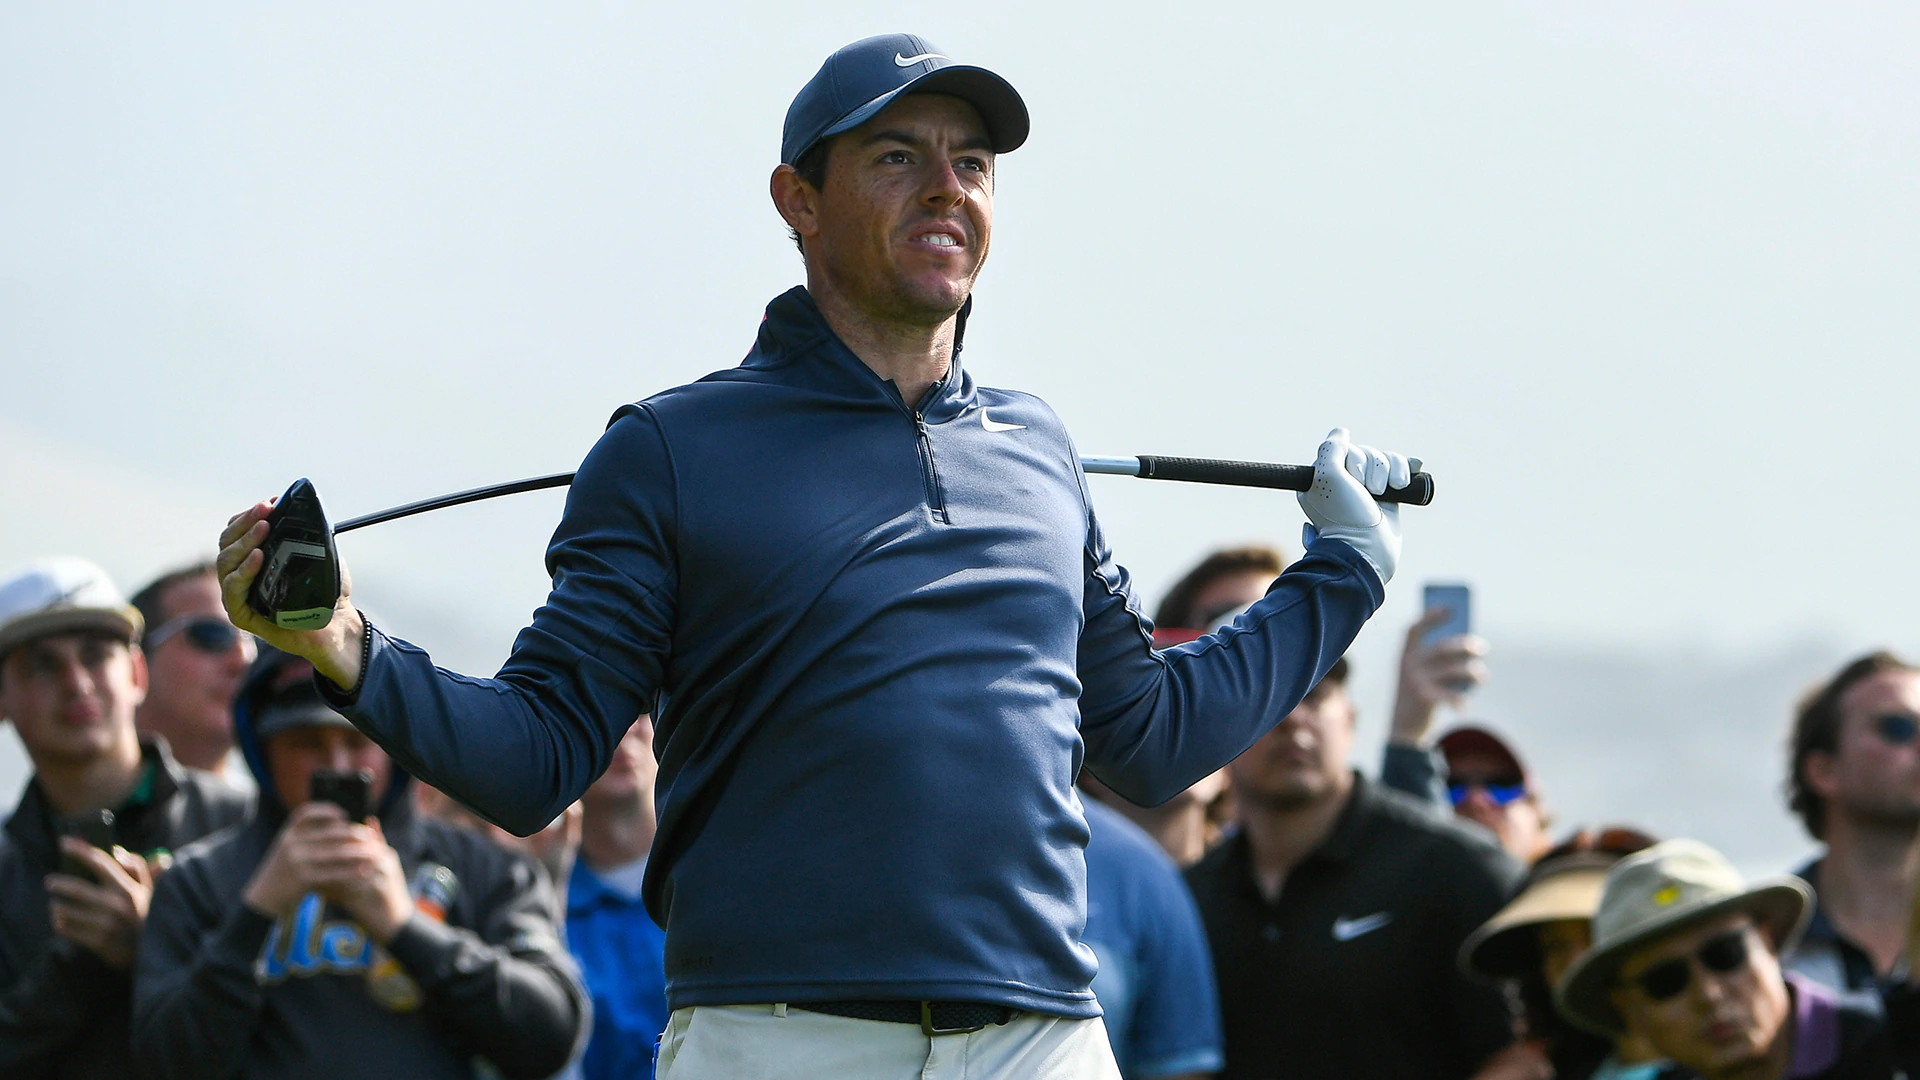 McIlroy's first Tour start of 2018 ends in an MC